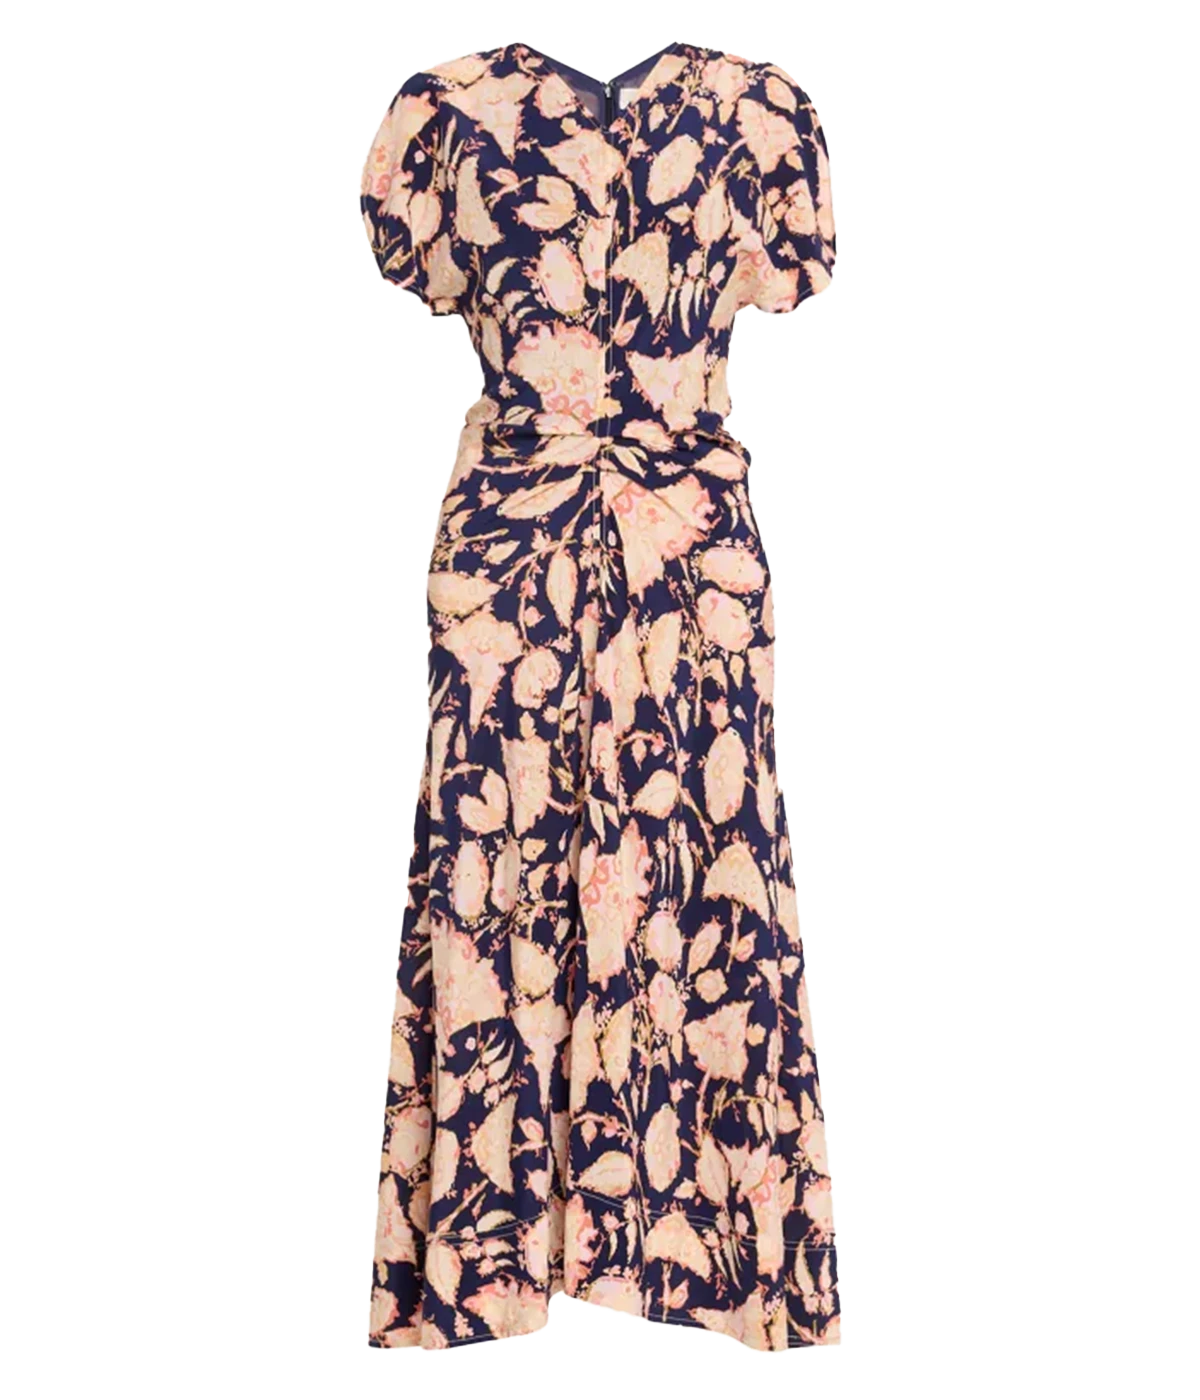 Remy Dress in Maritime Navy Multi